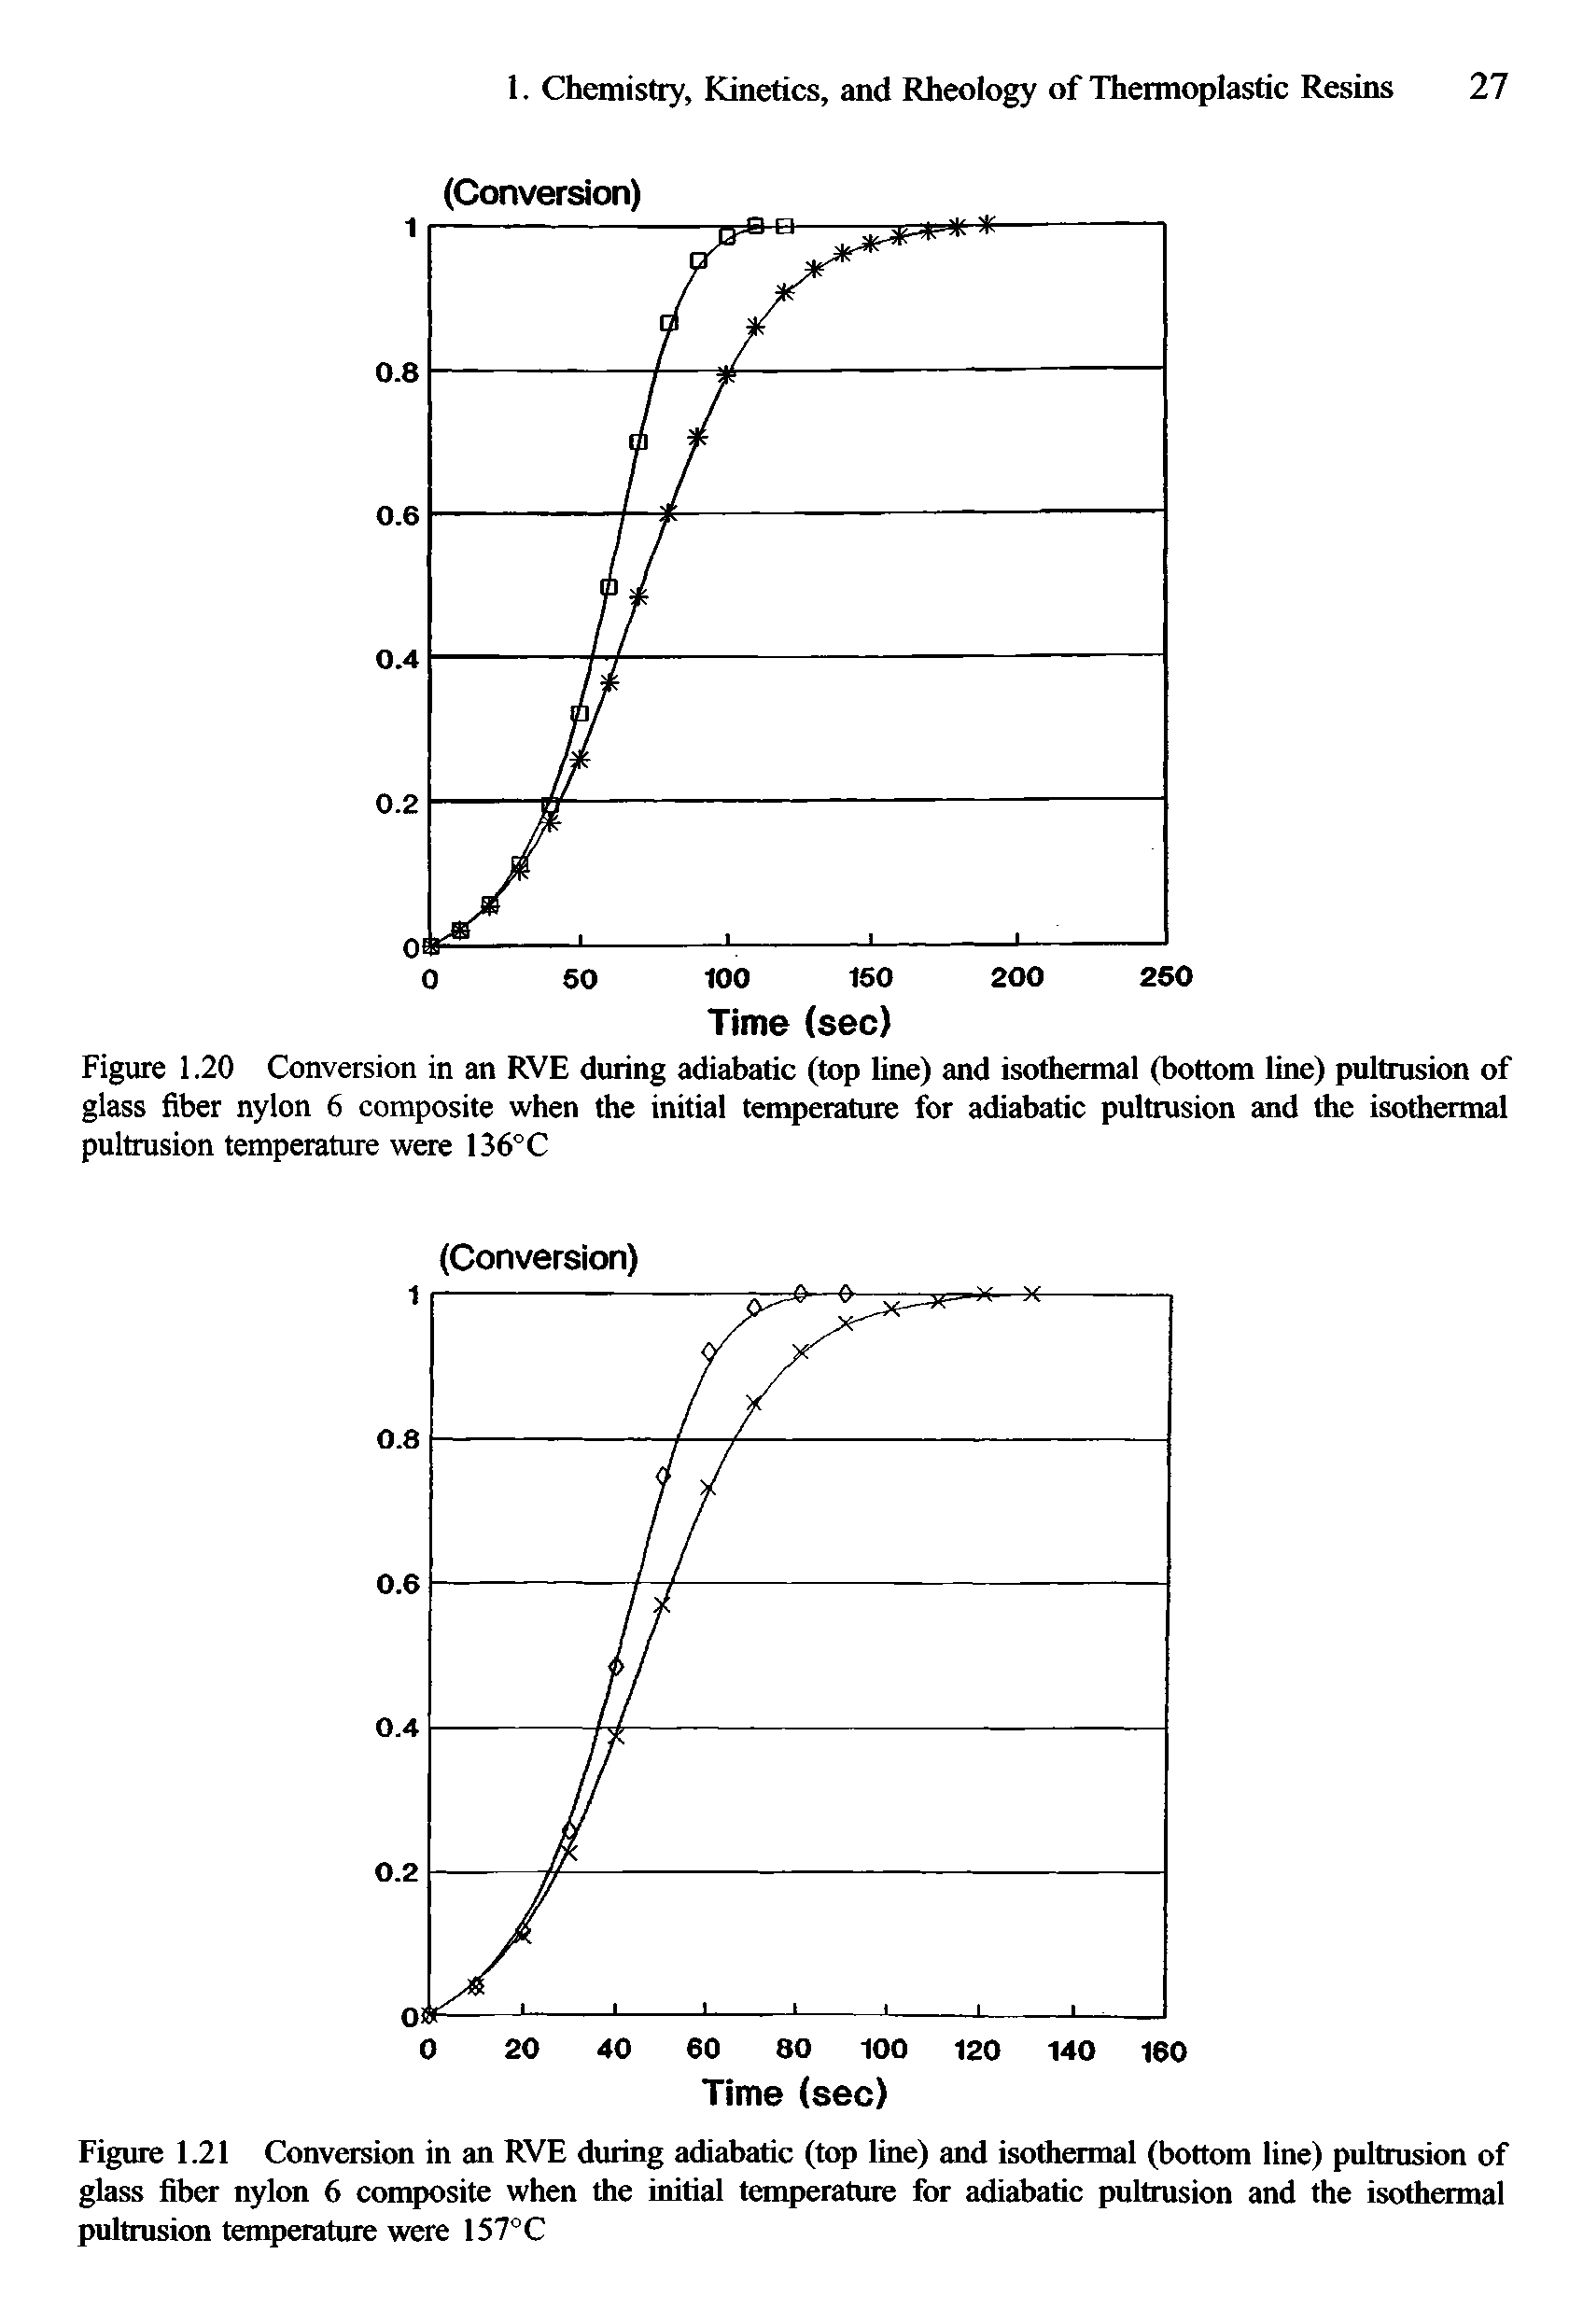 Figure 1.20 Conversion in an RVE during adiabatic (top line) and isothermal (bottom line) pultrusion of glass fiber nylon 6 composite when the initial temperature for adiabatic pultrusion and the isothermal pultrusion temperature were 136°C...